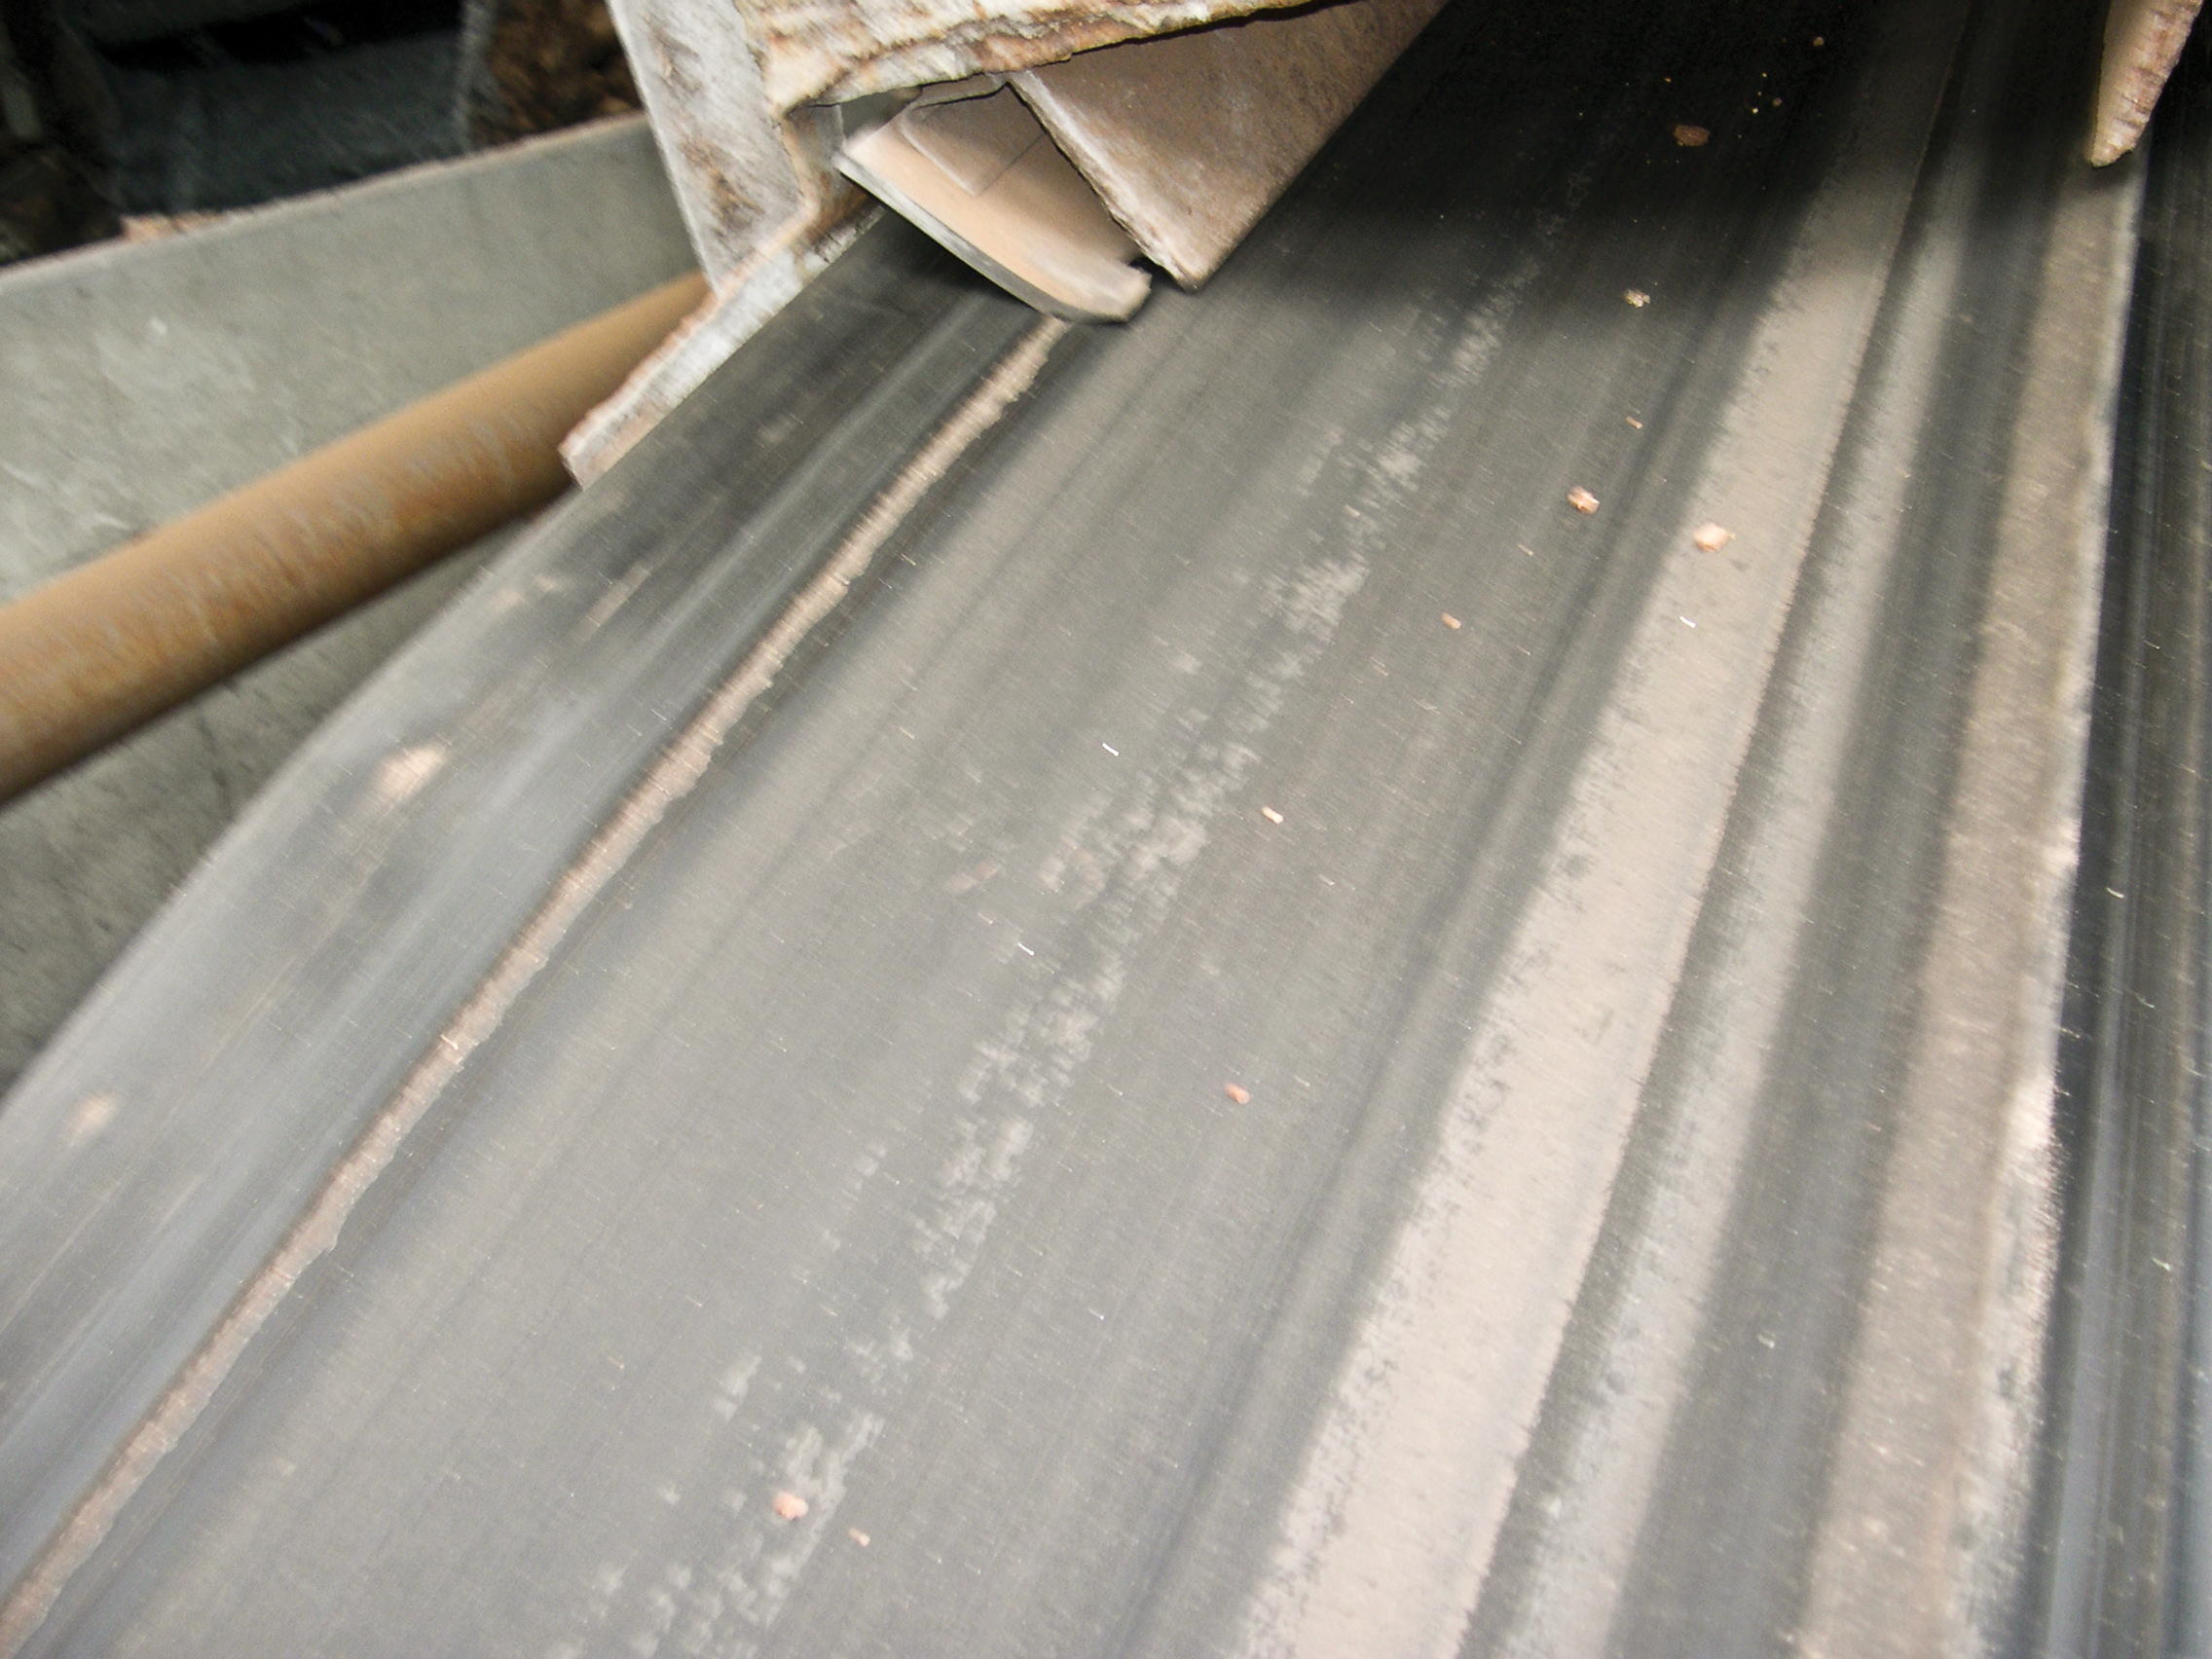 Conveyor belt with surface grooves due to entrapment damage.